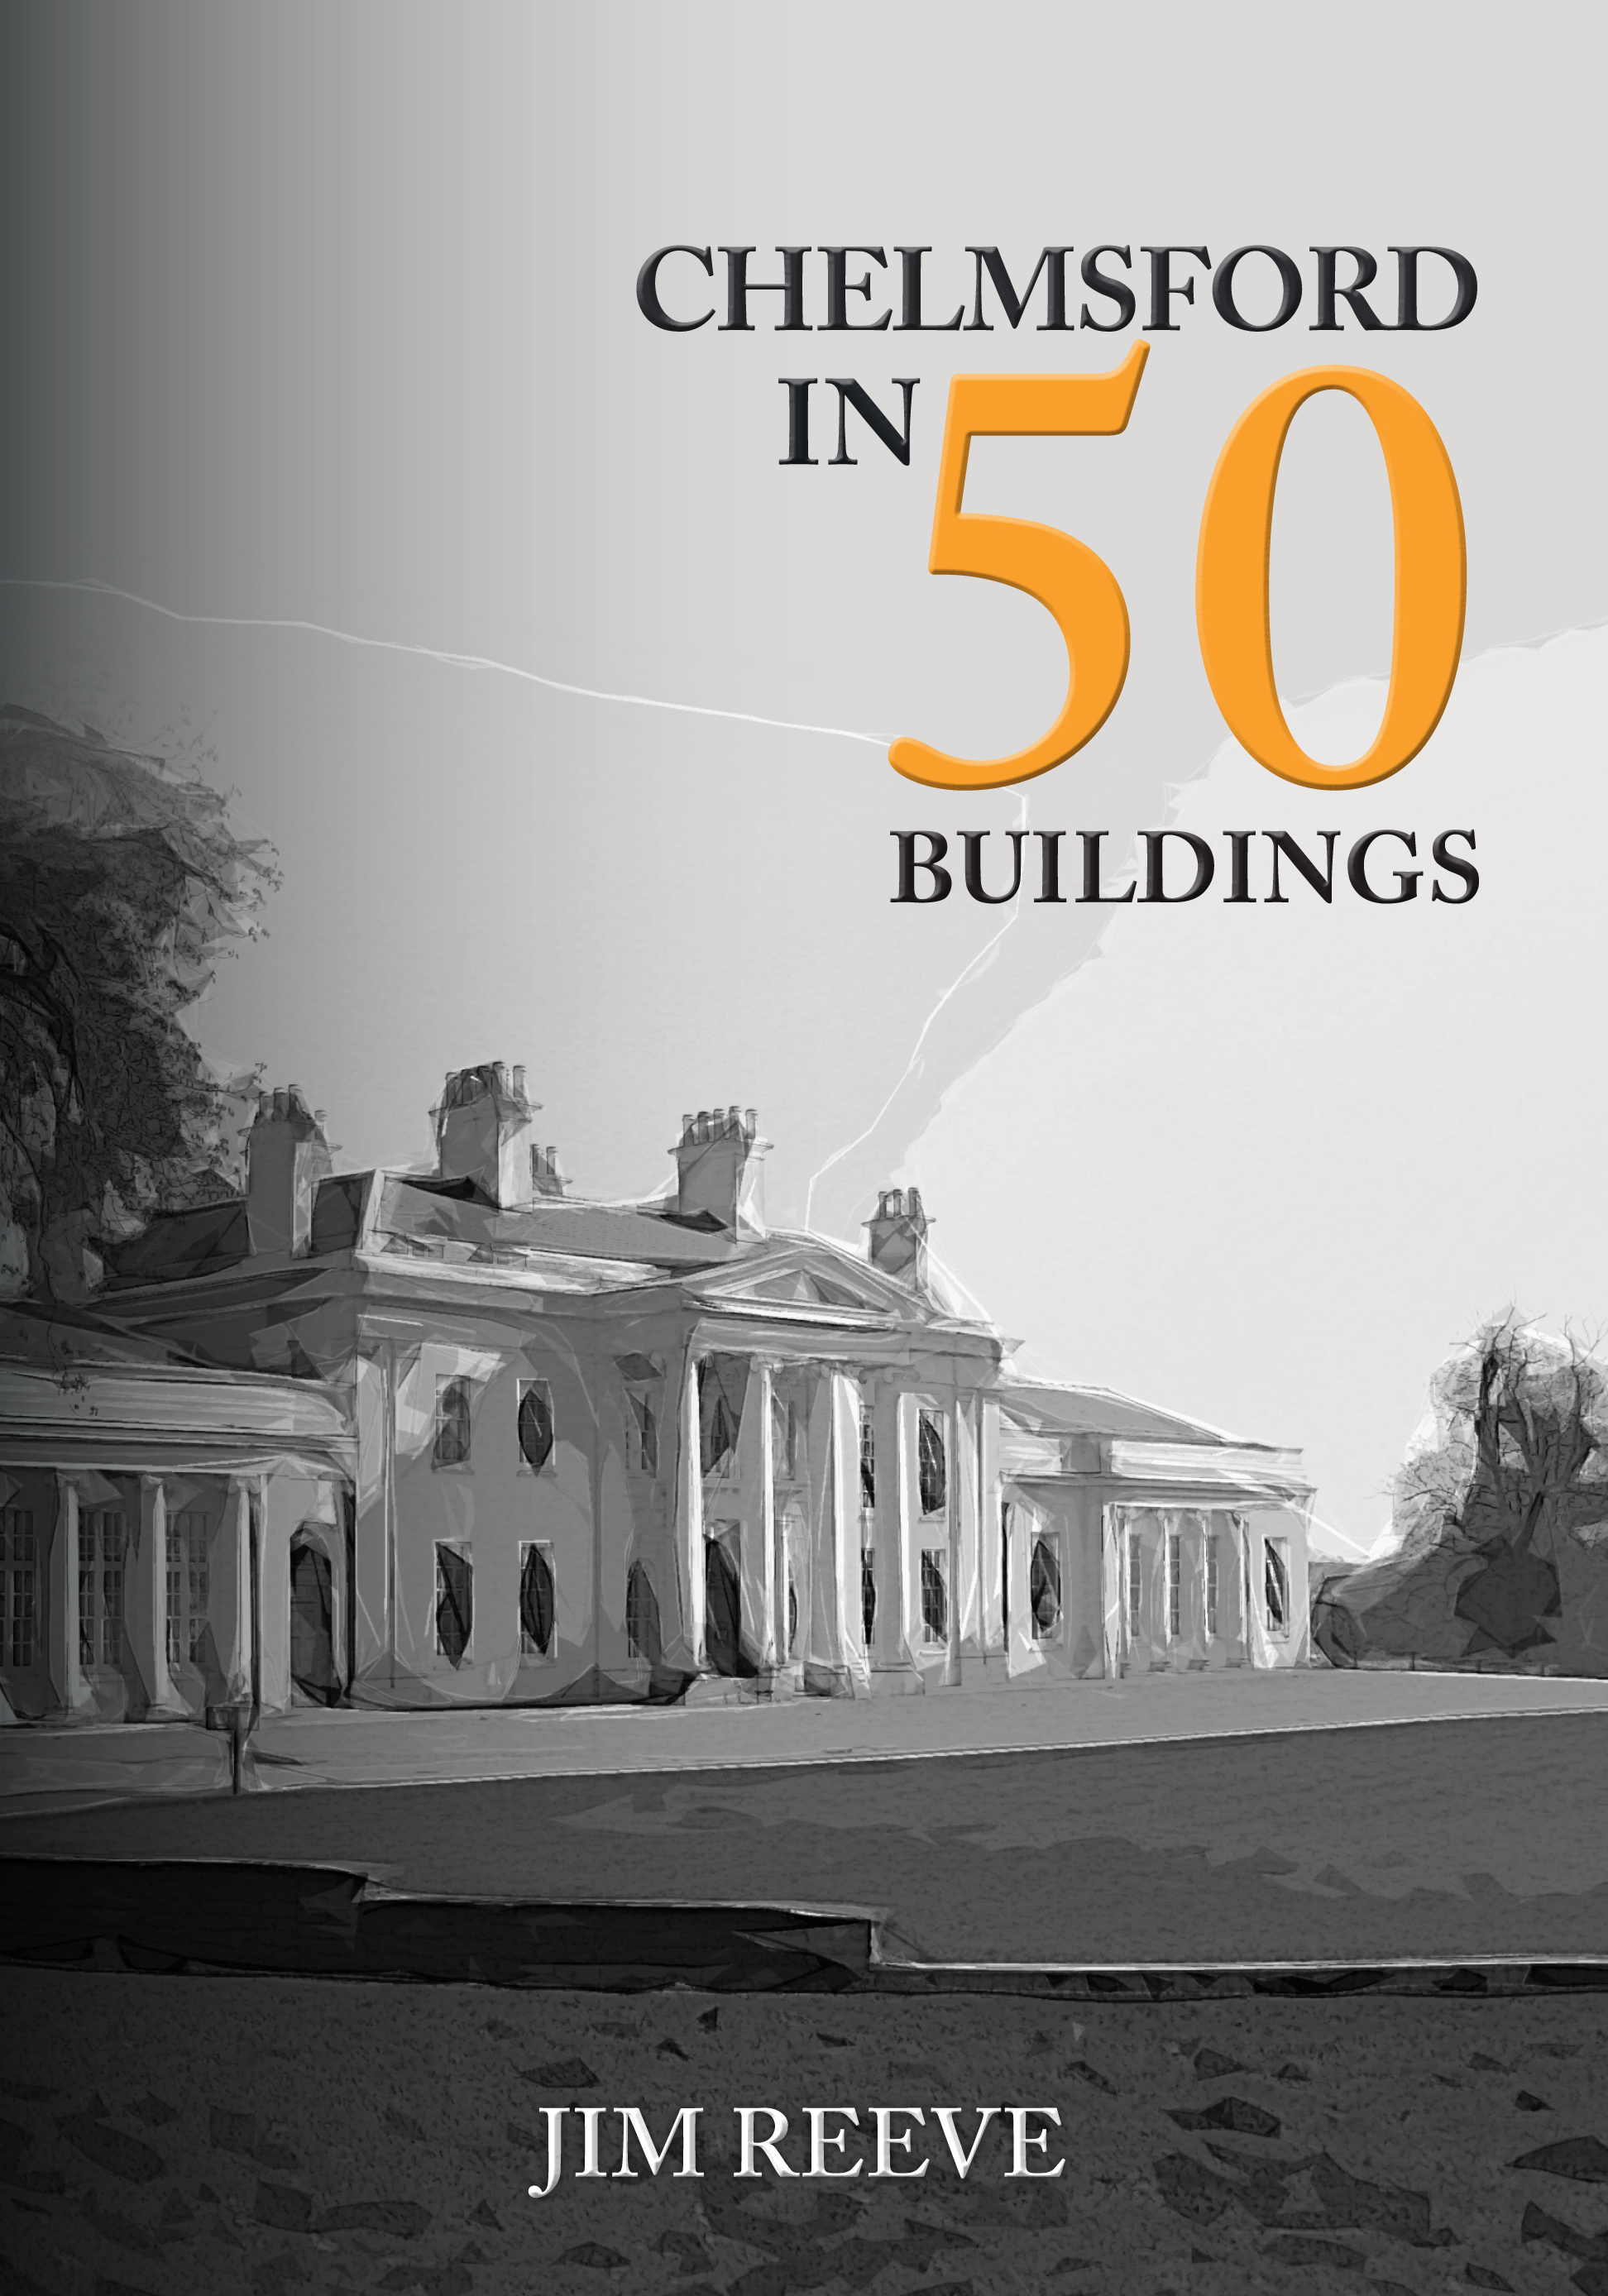 New book charts the history of Chelmsford by exploring 50 famous buildings